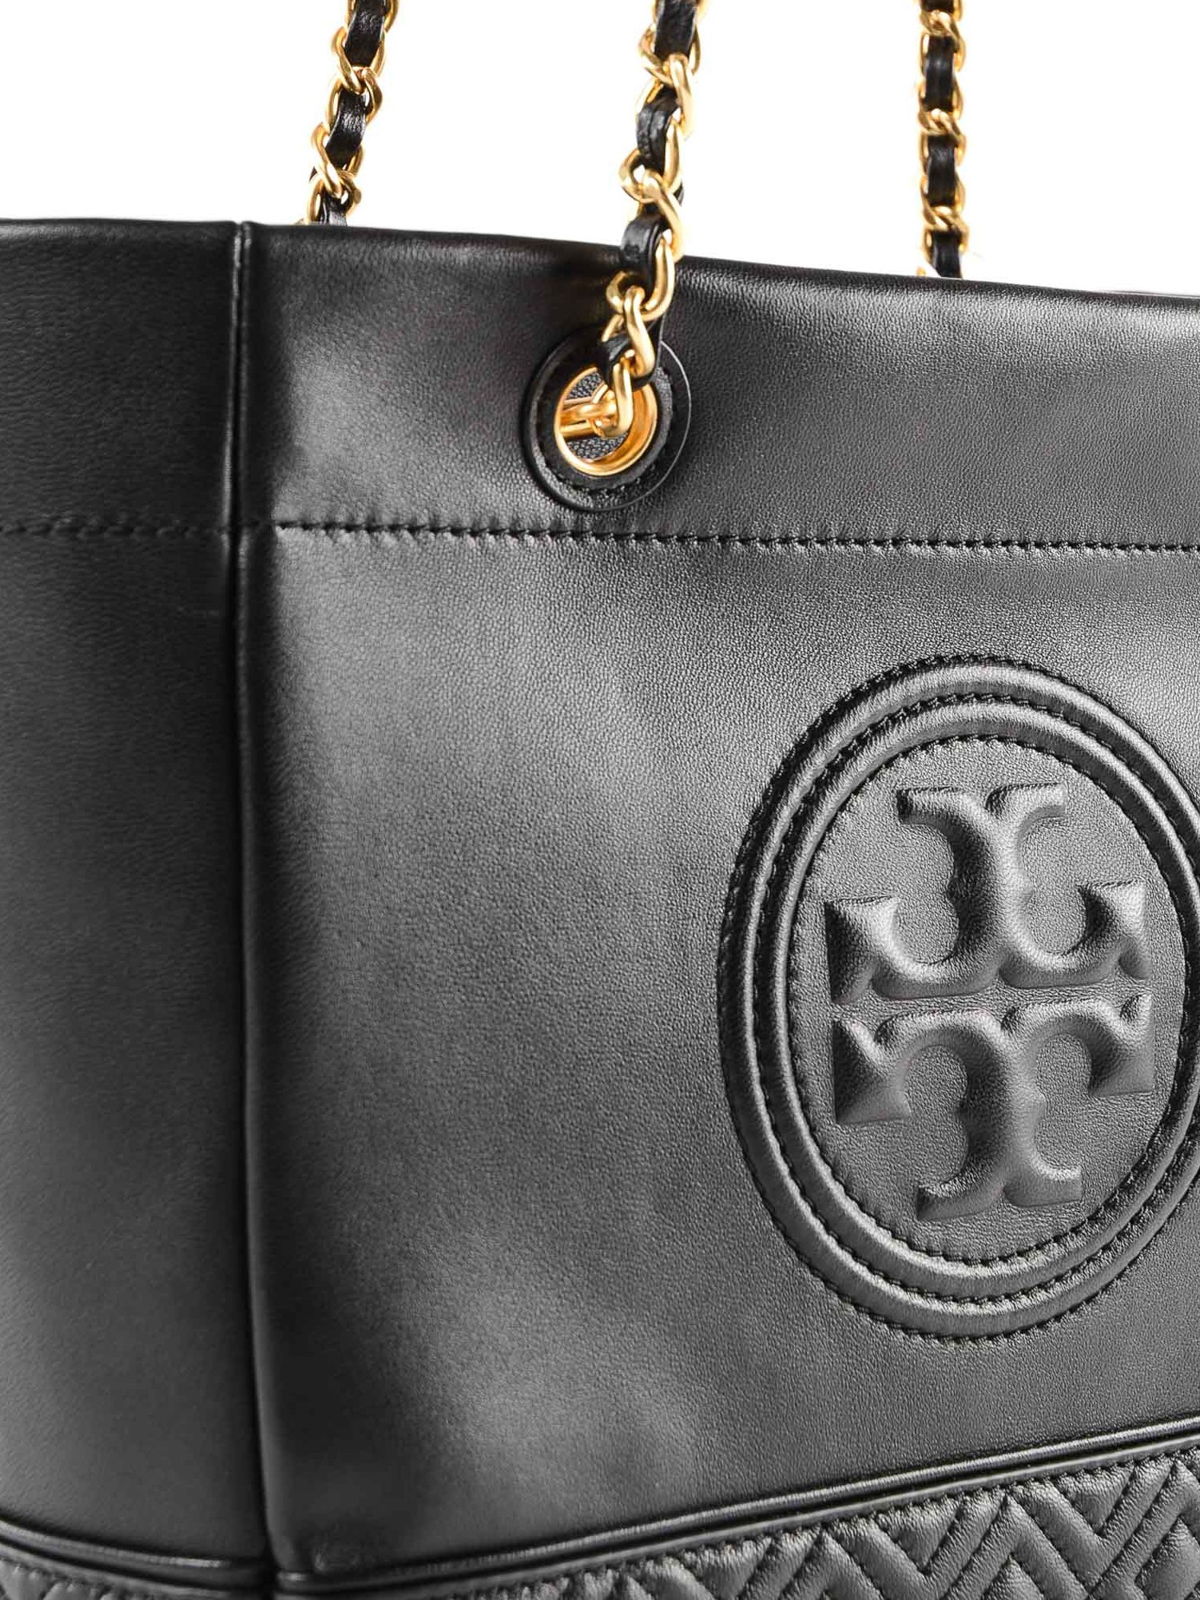 Arriba 83+ imagen tory burch black tote with gold chain - Thptnganamst ...